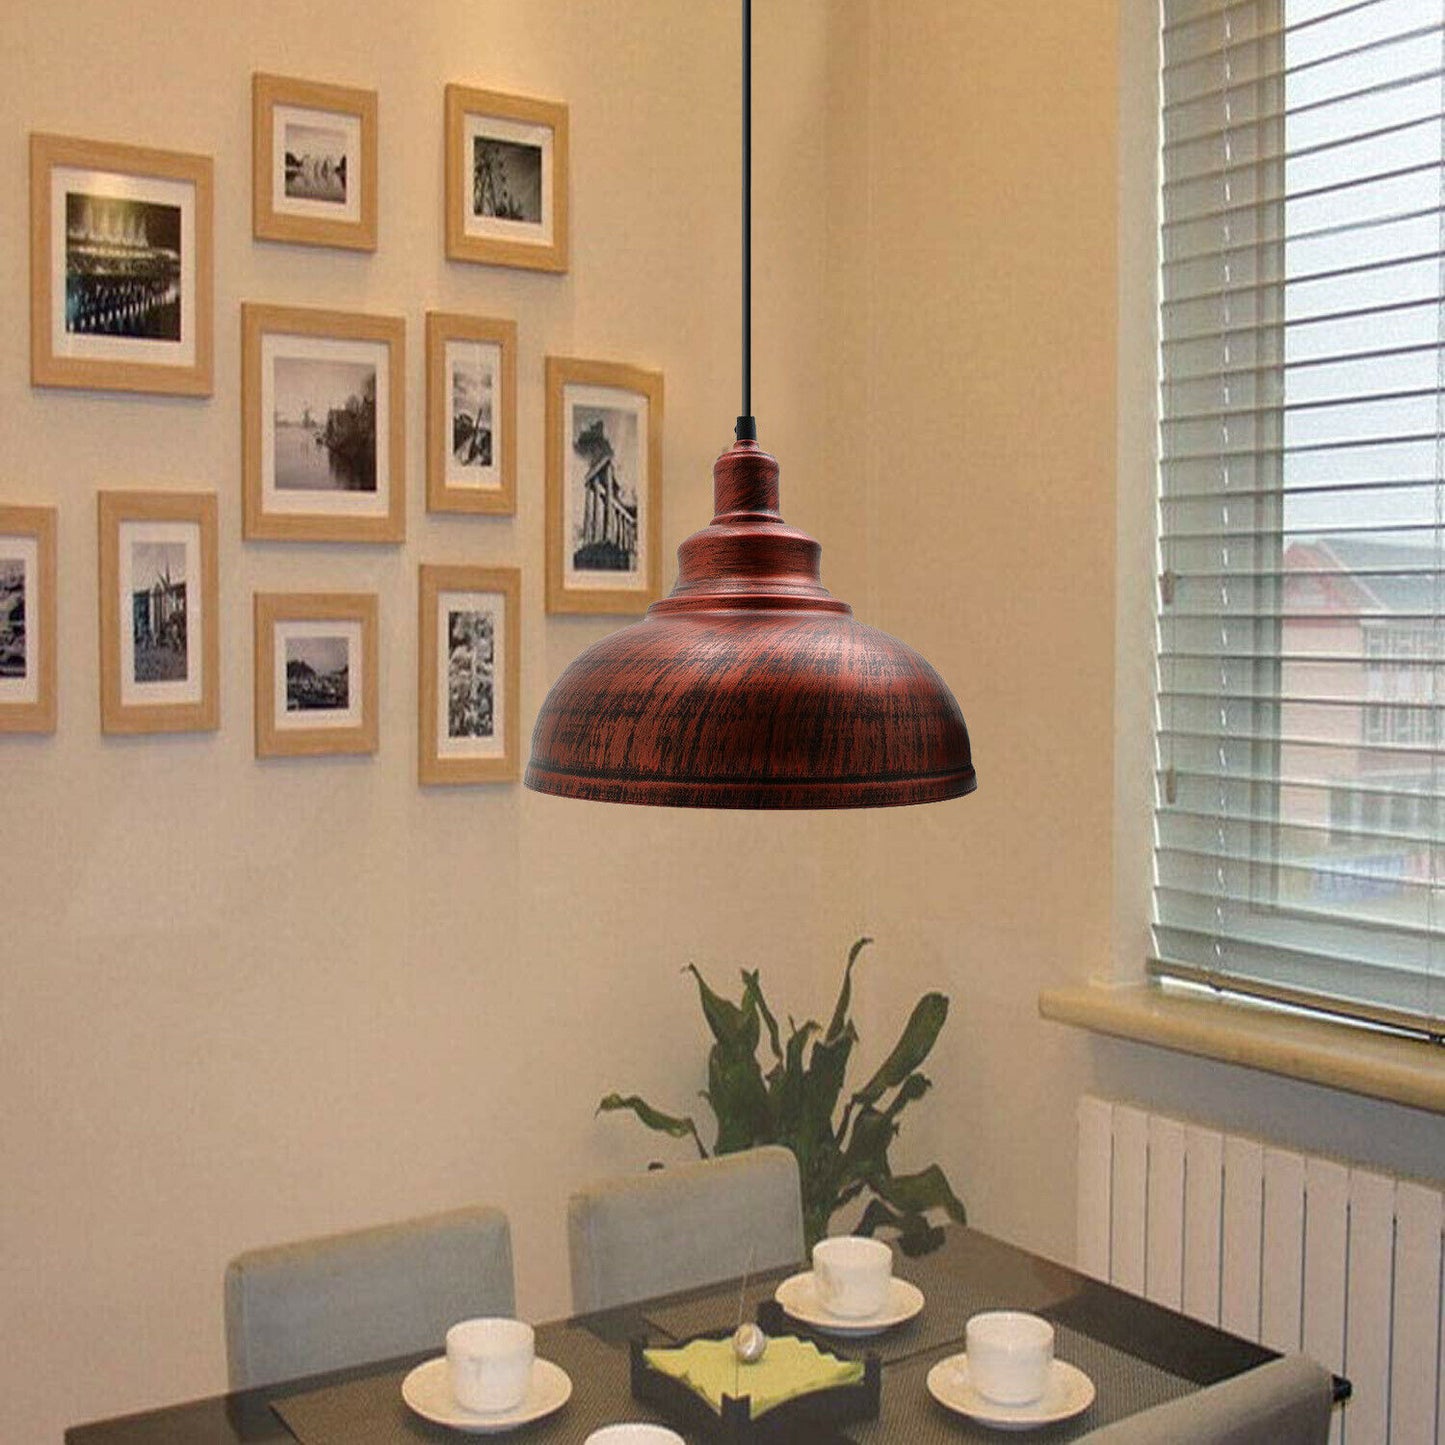 Rustic Red Retro Industrial Metal Dome Pendant Lamp Shade-Application Image